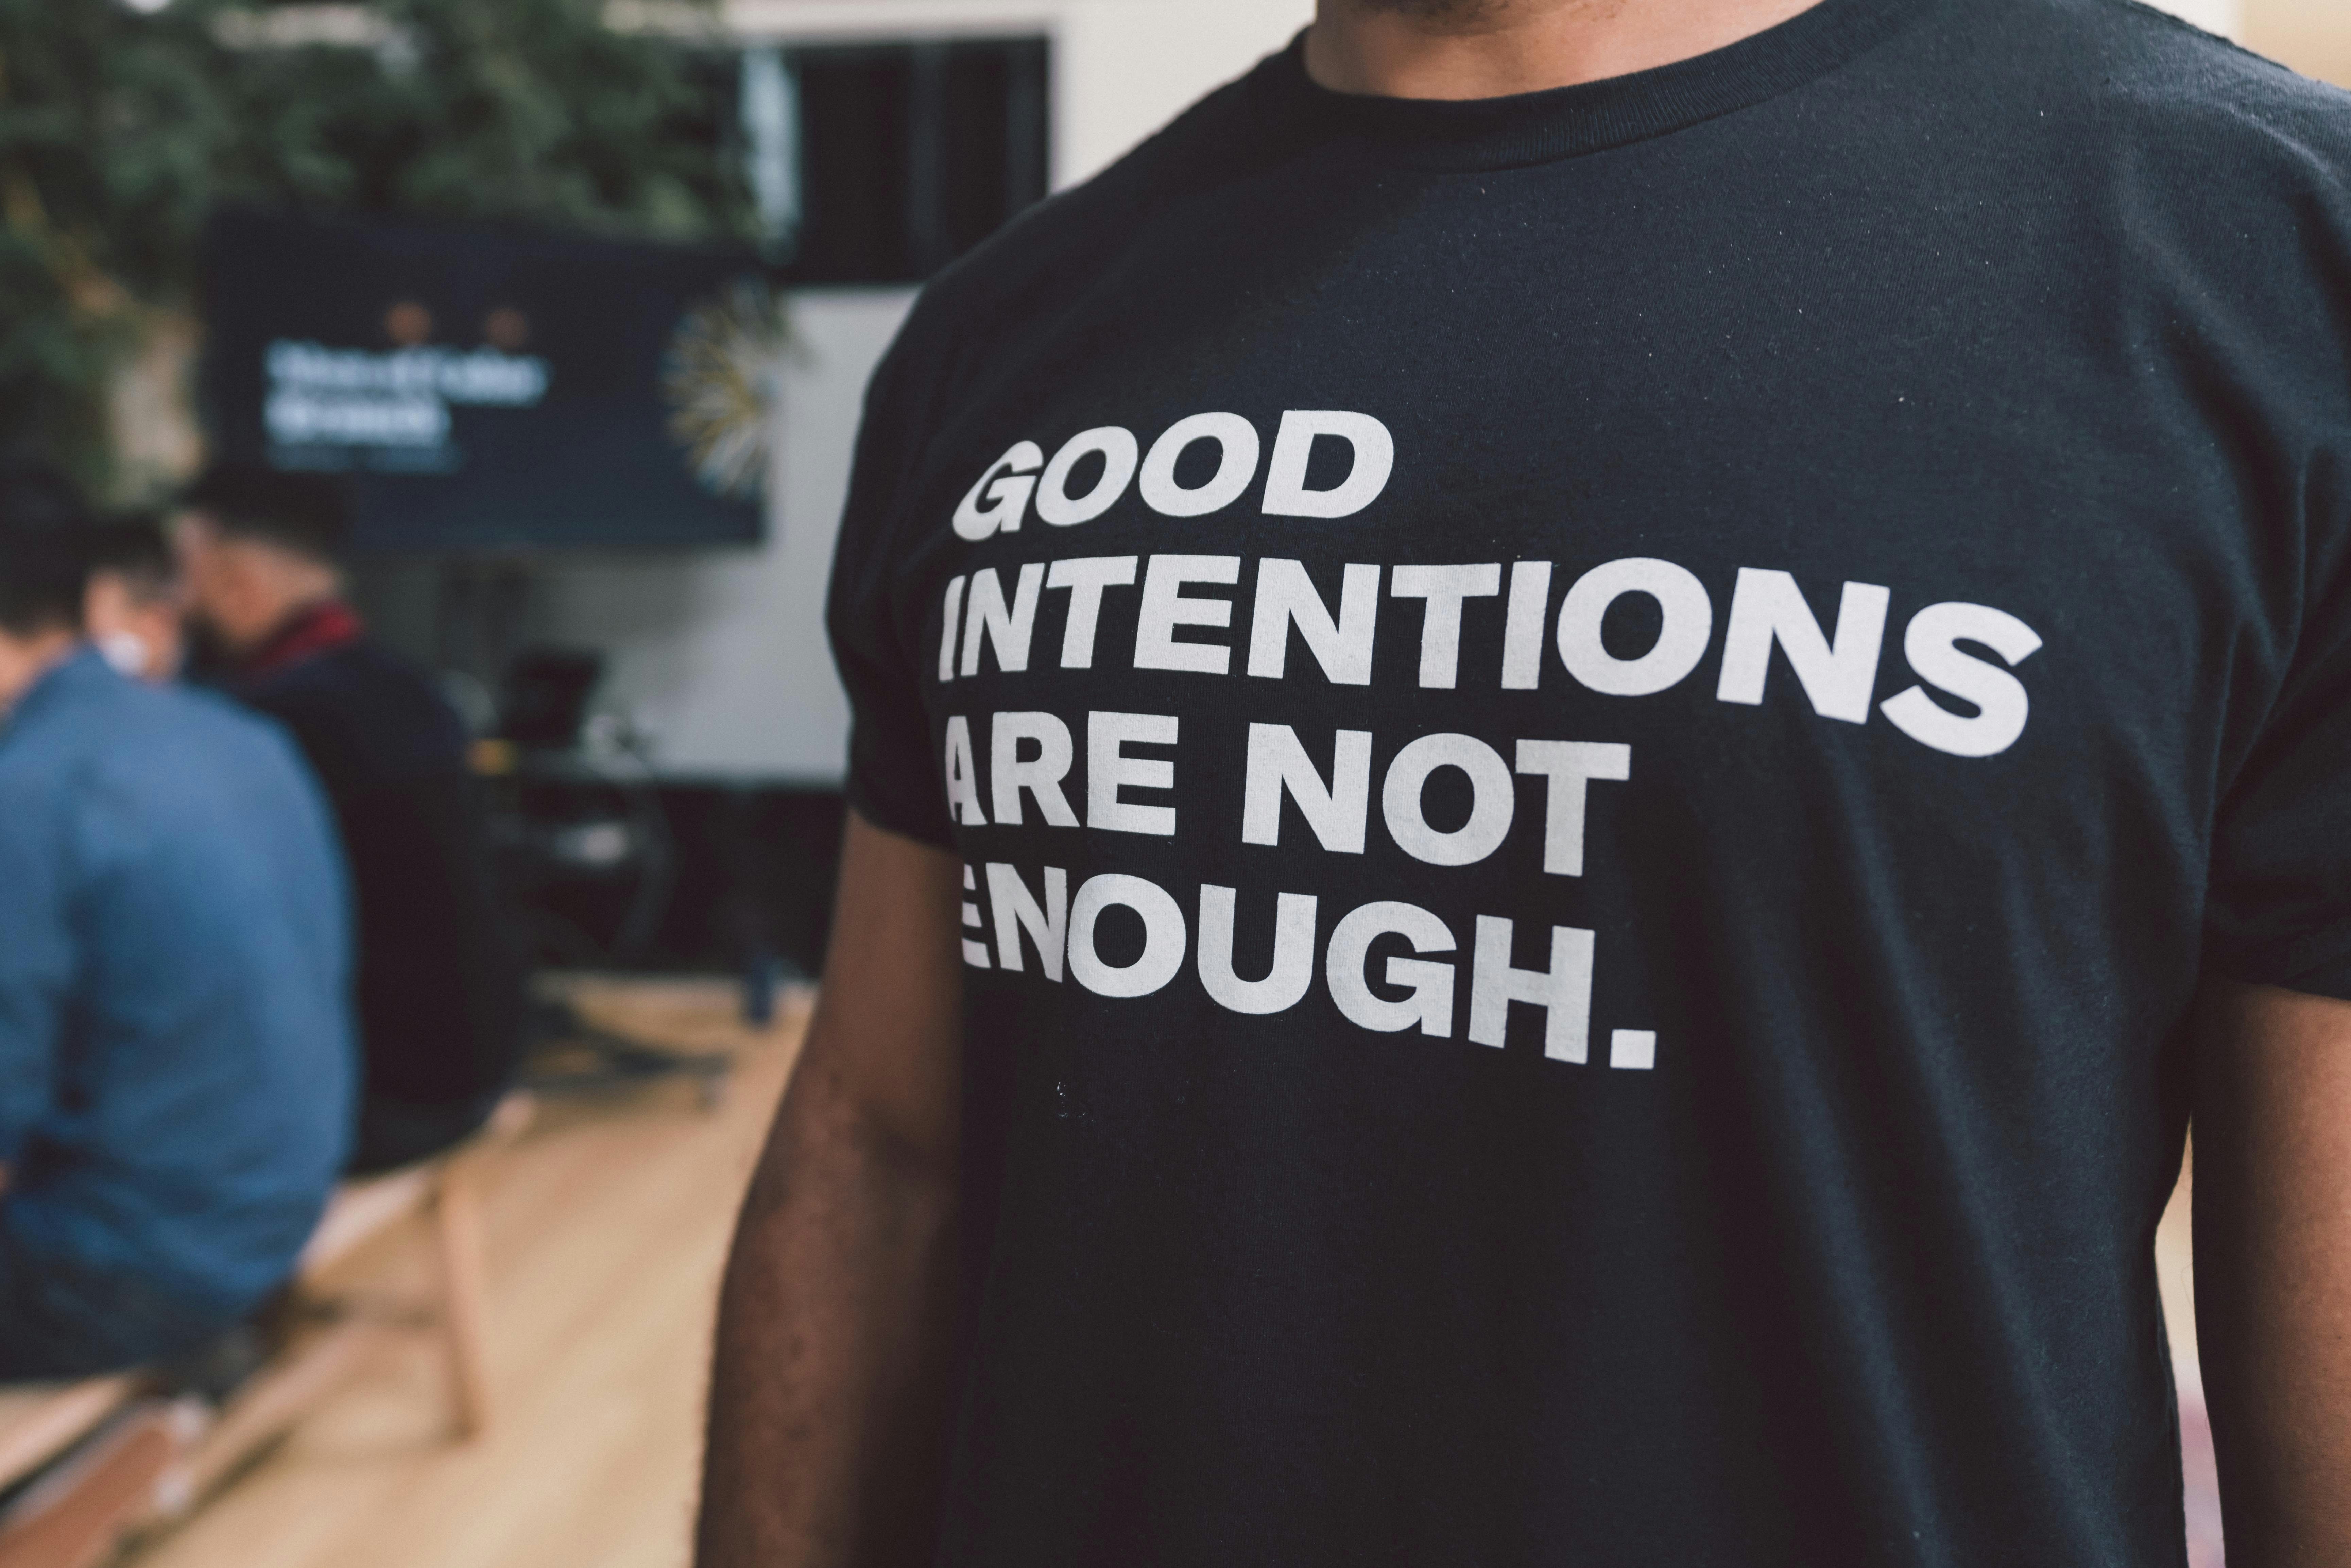 Person wearing a shirt that says, "Good intentions are not enough."